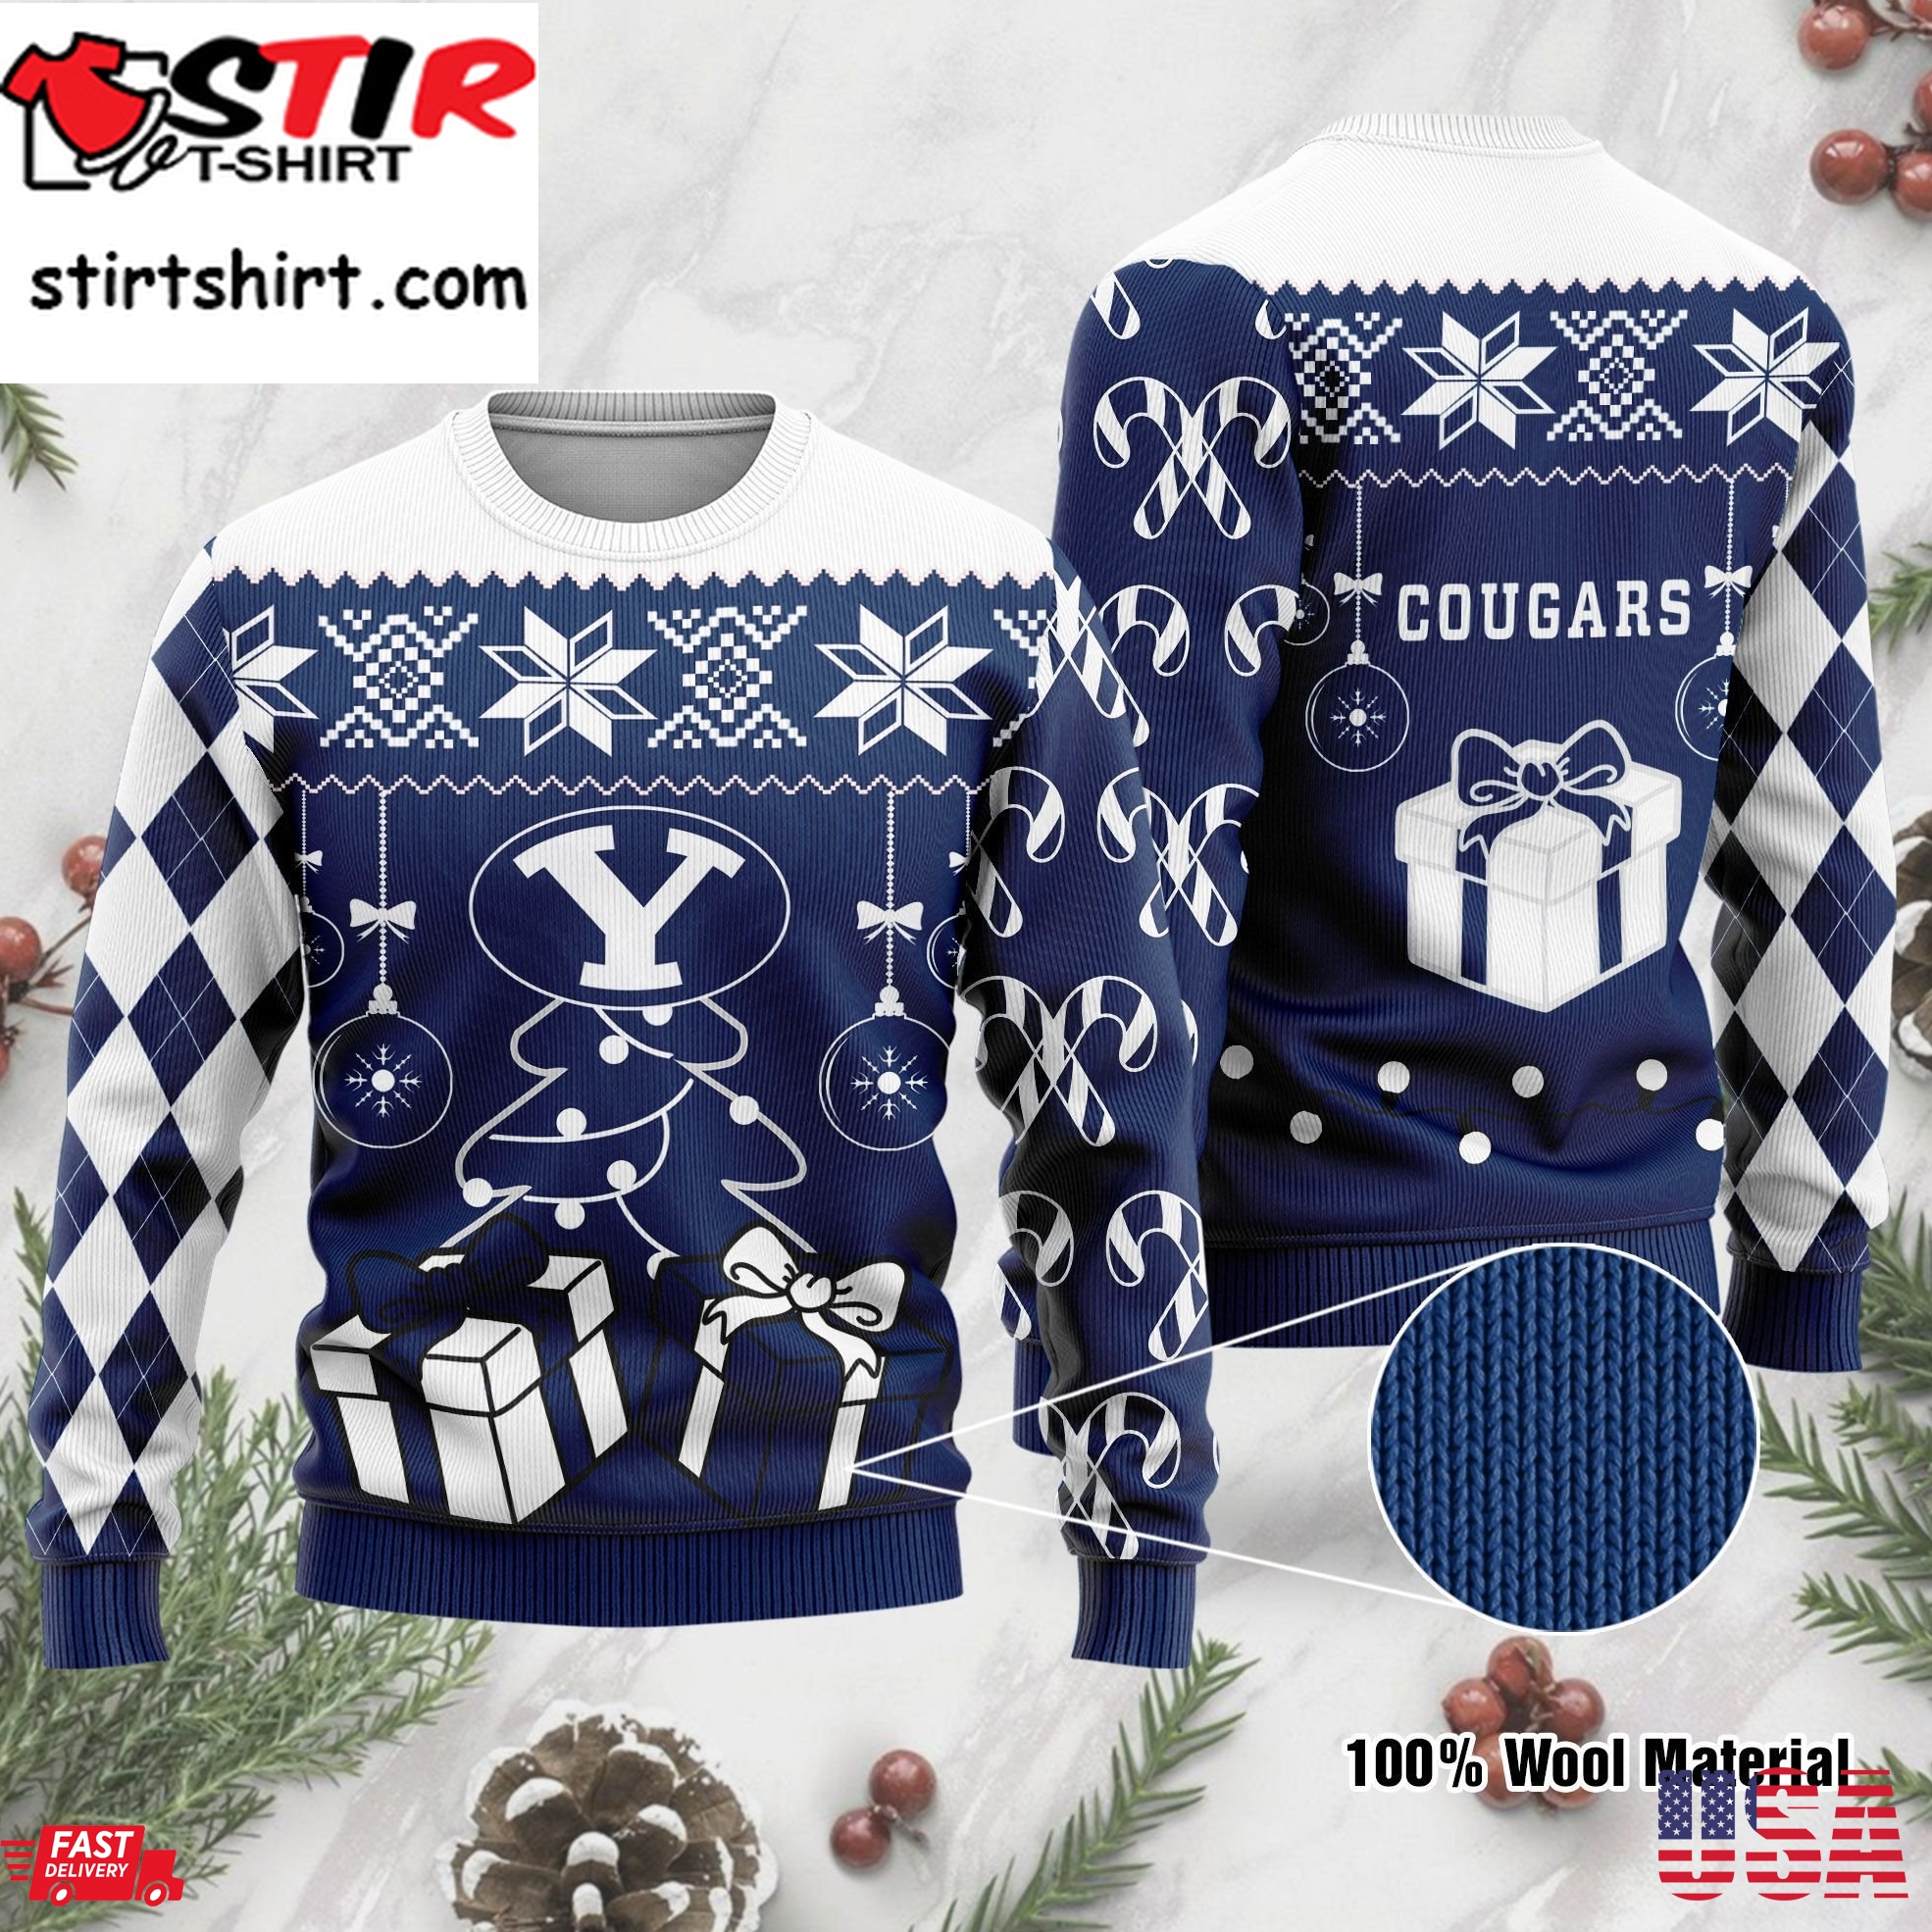 Byu Cougars Funny Ugly Christmas Sweater, Ugly Sweater, Christmas Sweaters, Hoodie, Sweatshirt, Sweater